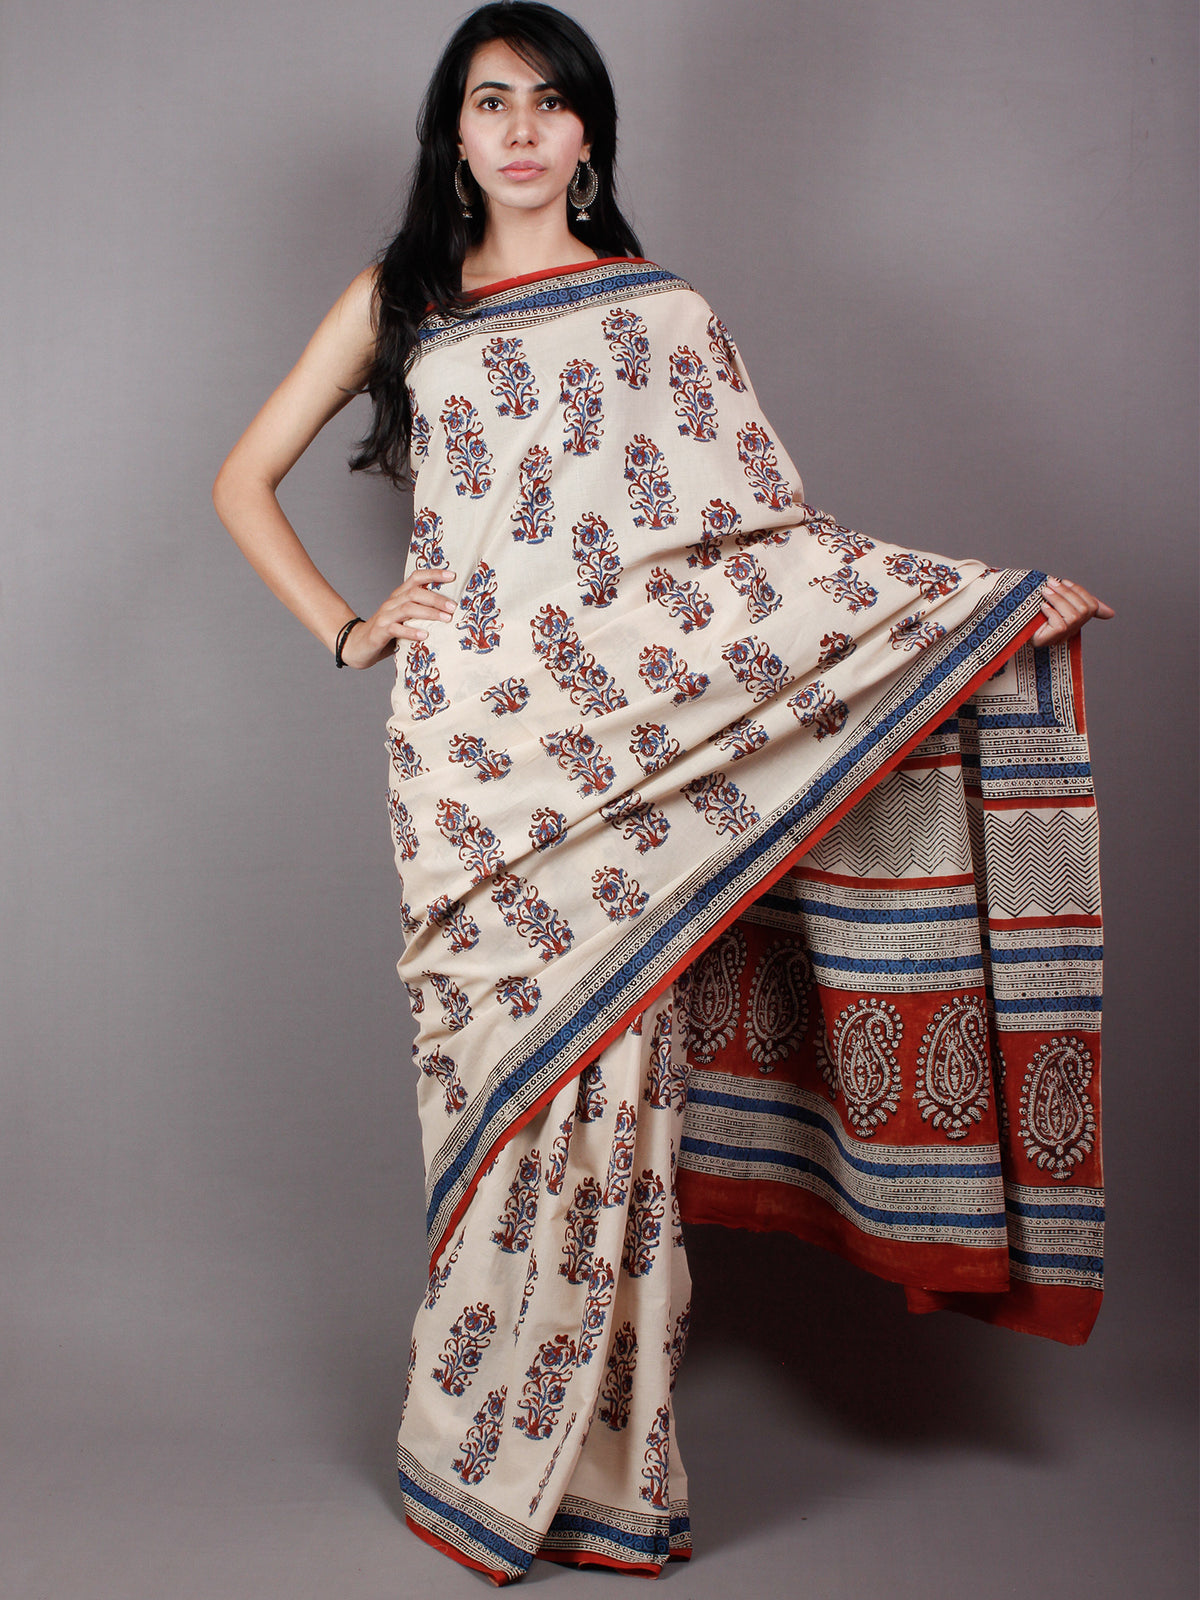 Beige Red Blue Cotton Hand Block Printed Saree in Natural Colors With Multi Color Border - S03170490